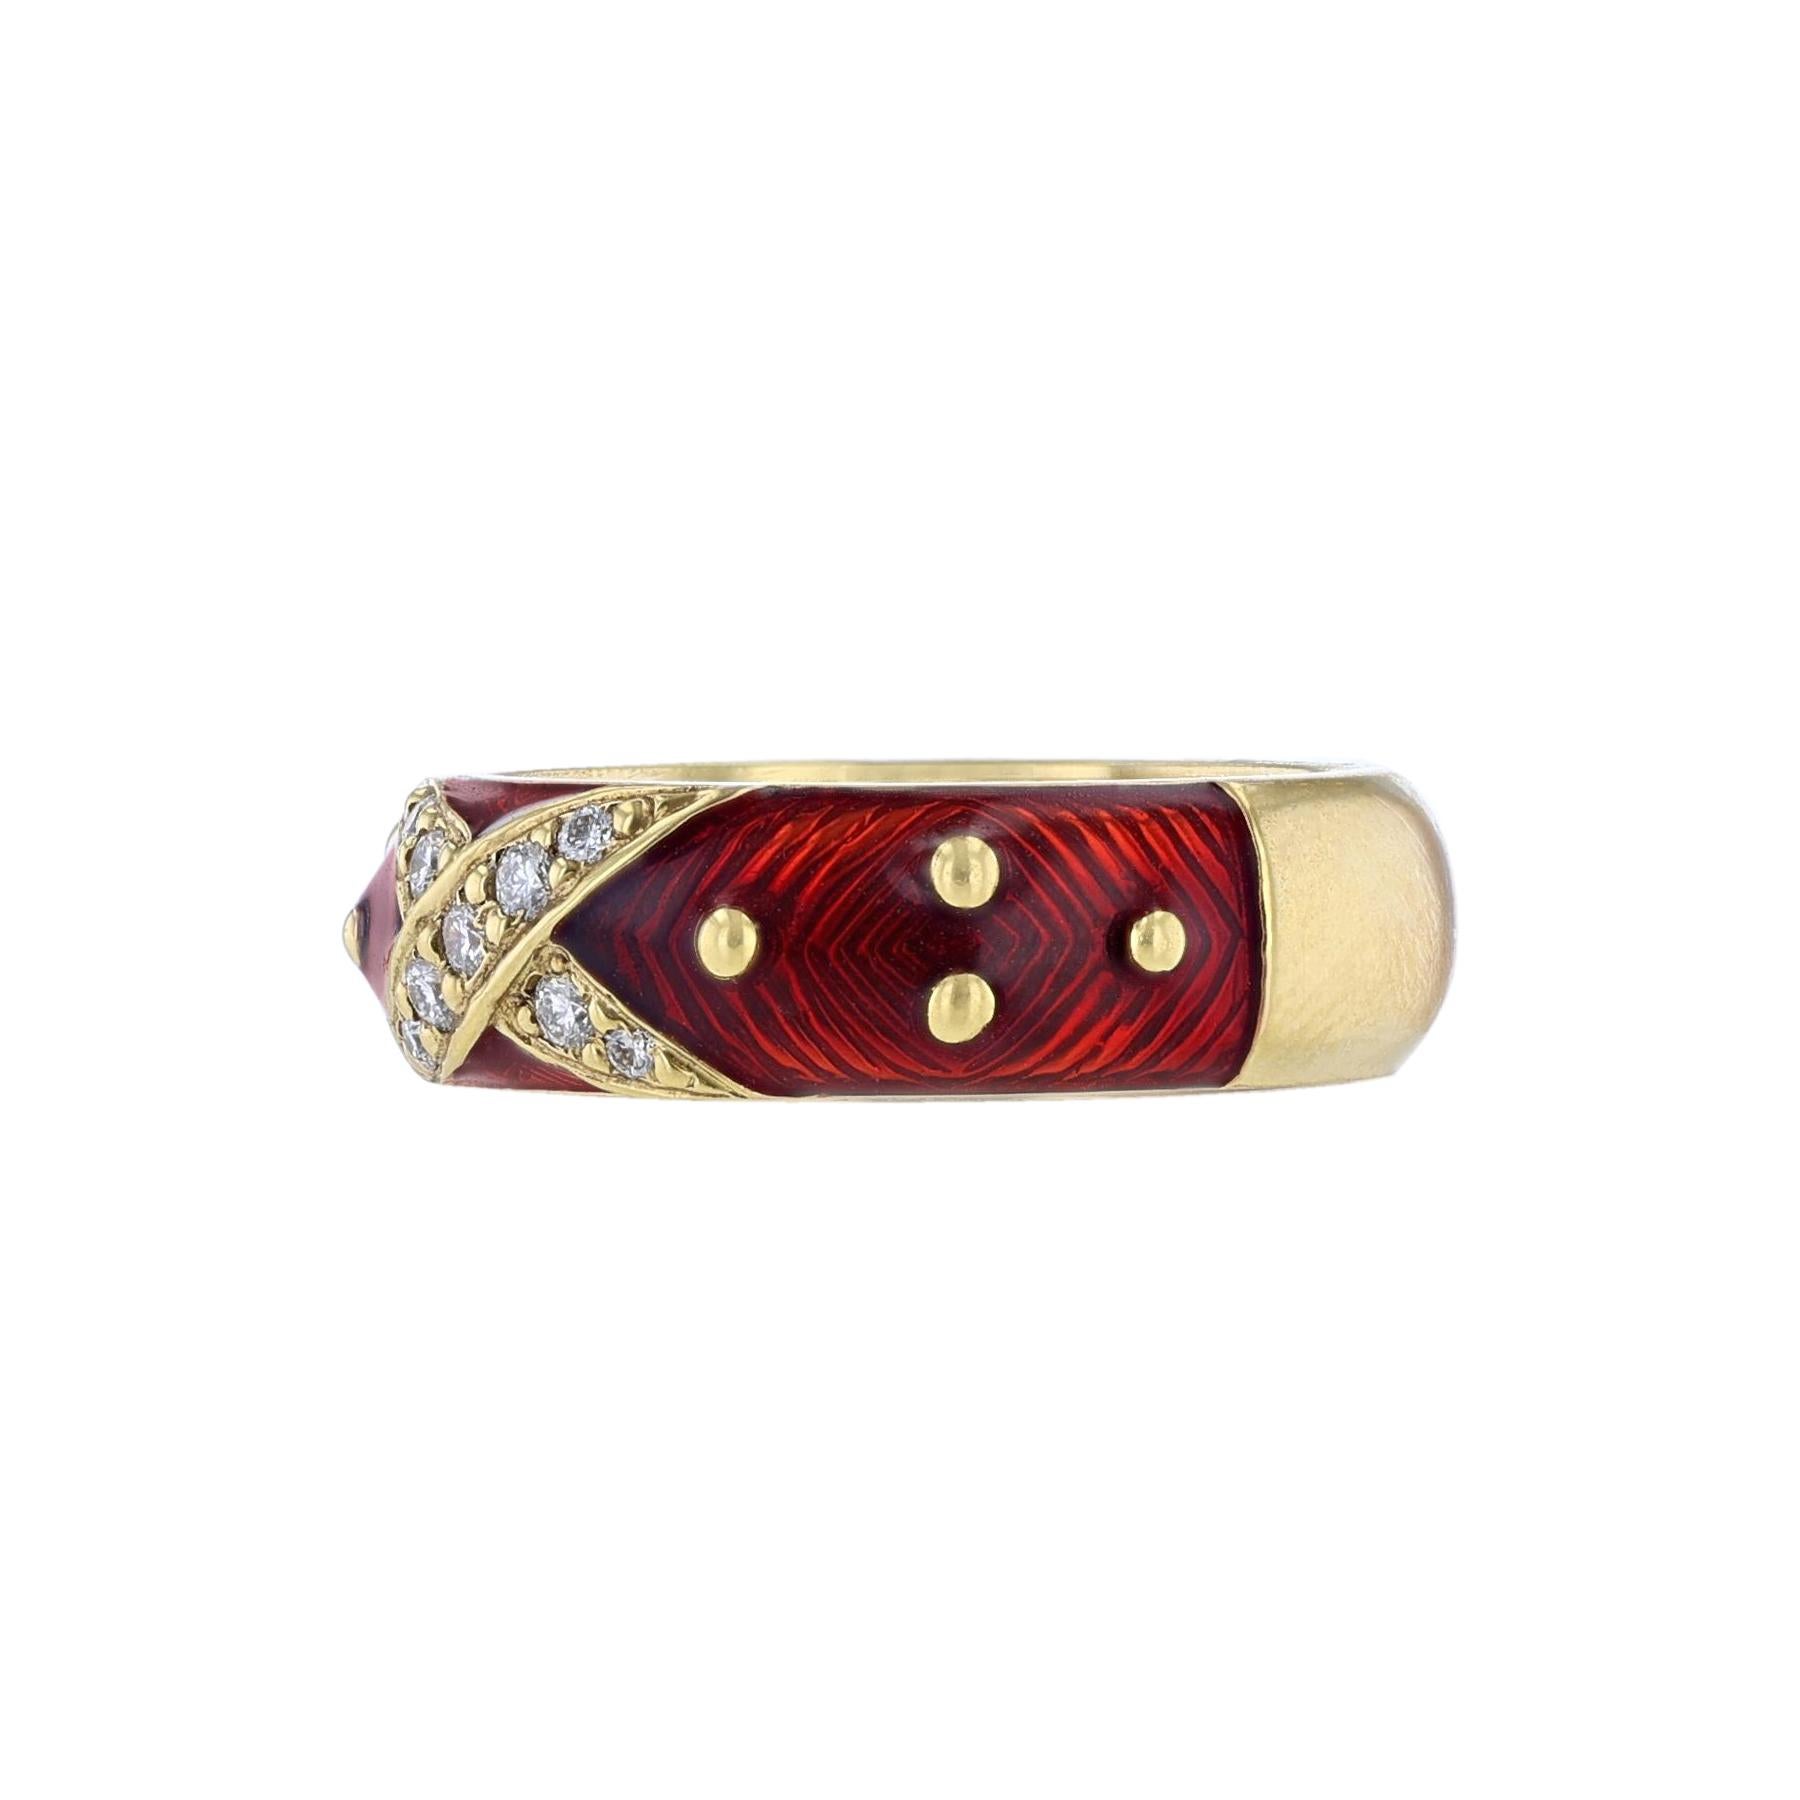 This ring is made in 18K yellow gold and red enamel. It features a center 